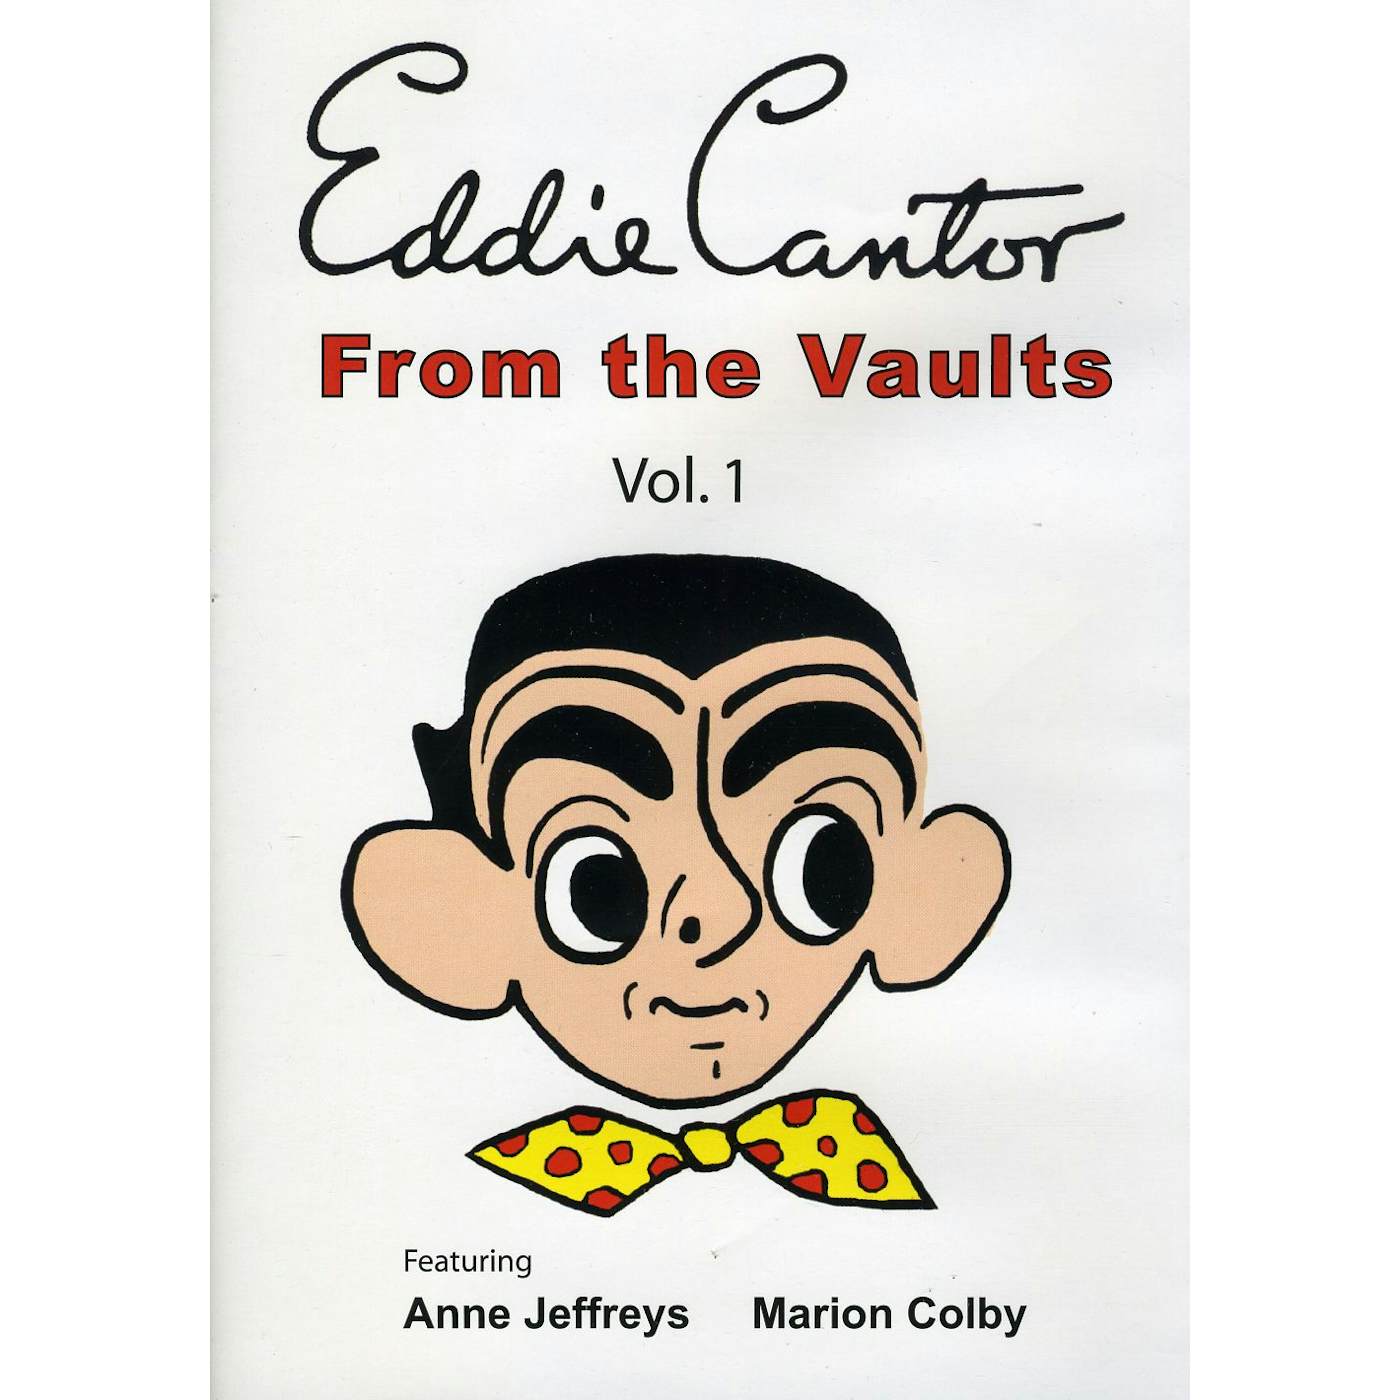 Eddie Cantor FROM THE VAULTS 1 DVD